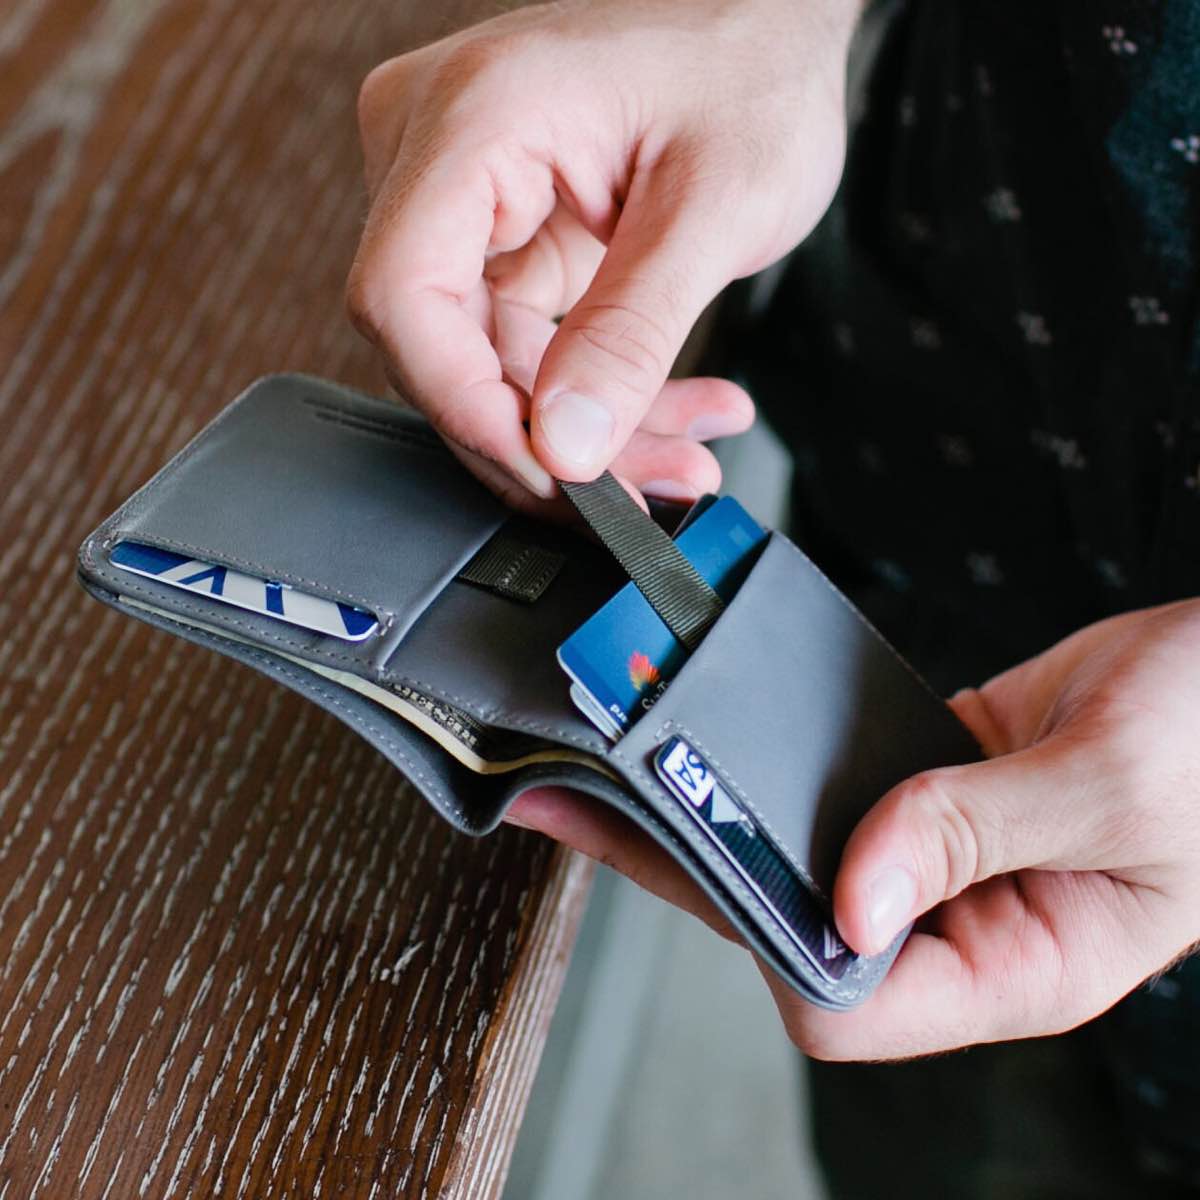 The pull-tab ribbons allow for easy card access.